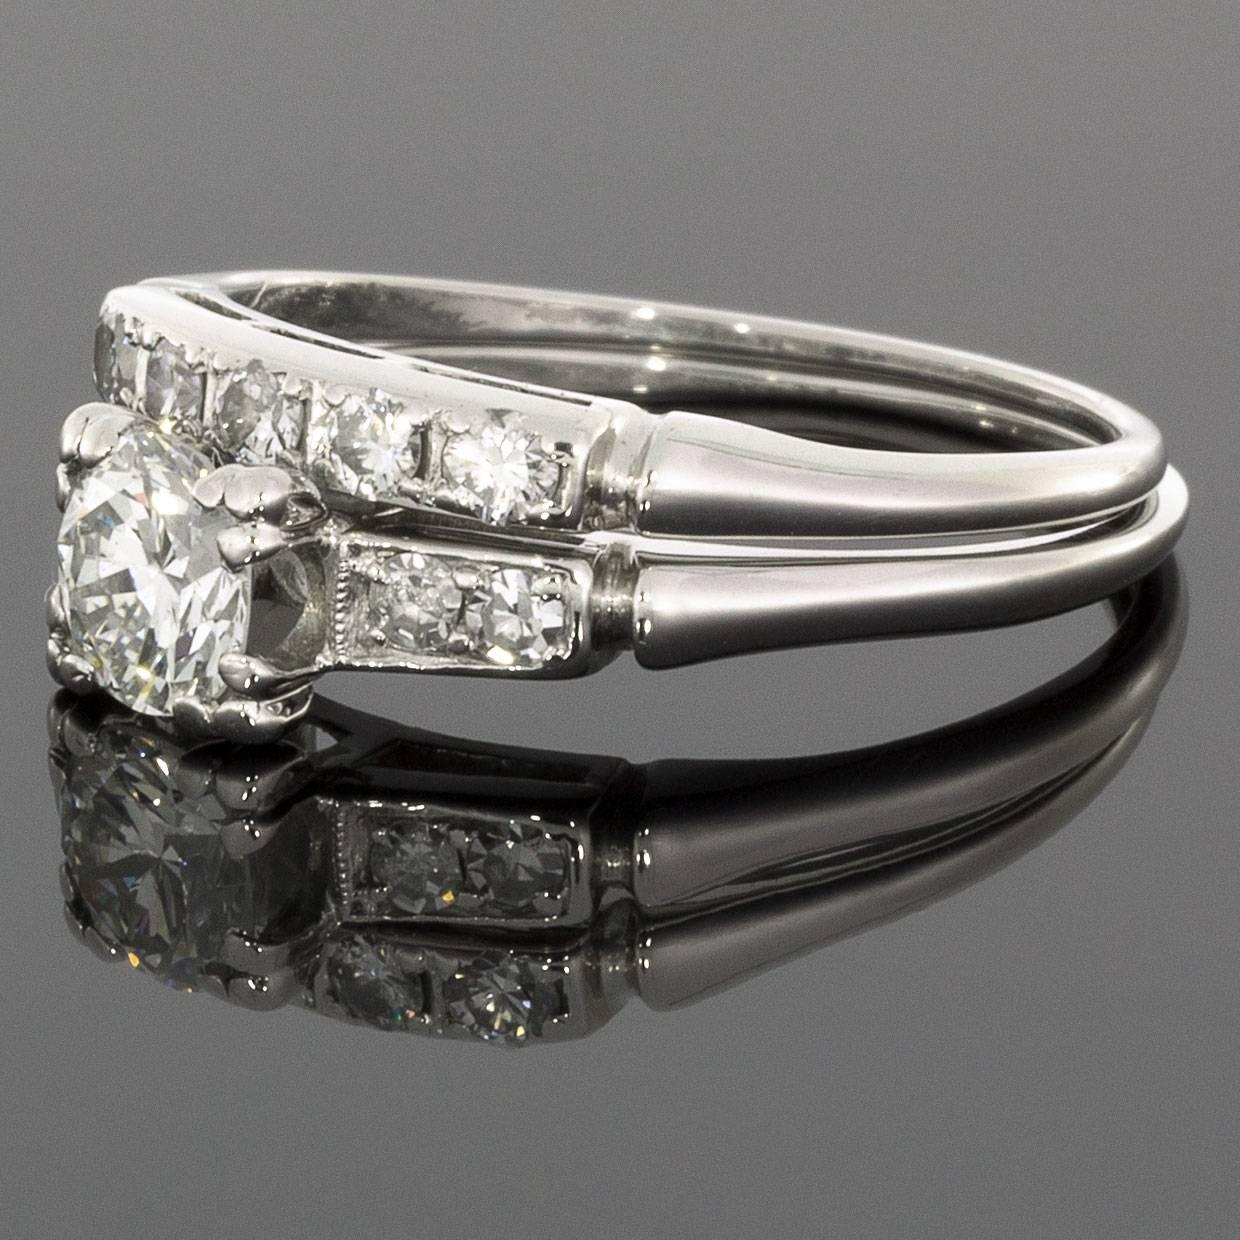 This gorgeous vintage engagement ring & wedding band set gives an elegant, timeless look. The set is comprised of platinum & features a scintillating, .45 carat round brilliant cut center diamond. This diamond grades as H/VS1 in quality